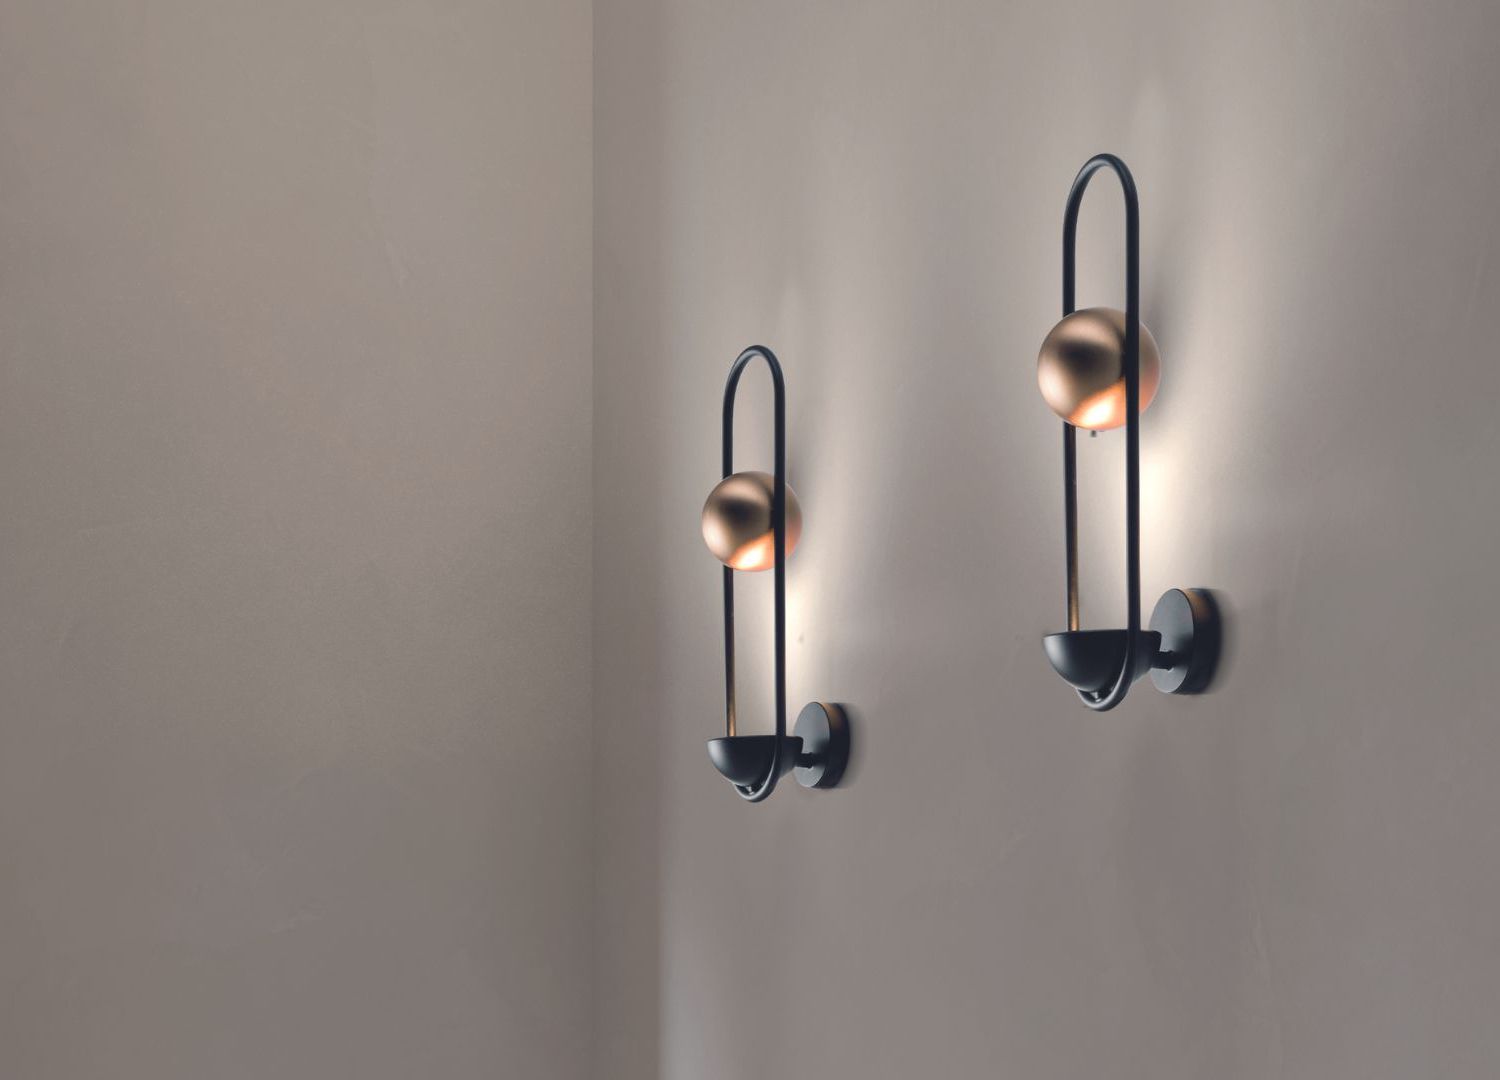 Luppiter lighting collection by Marco Zito for Masiero (5)